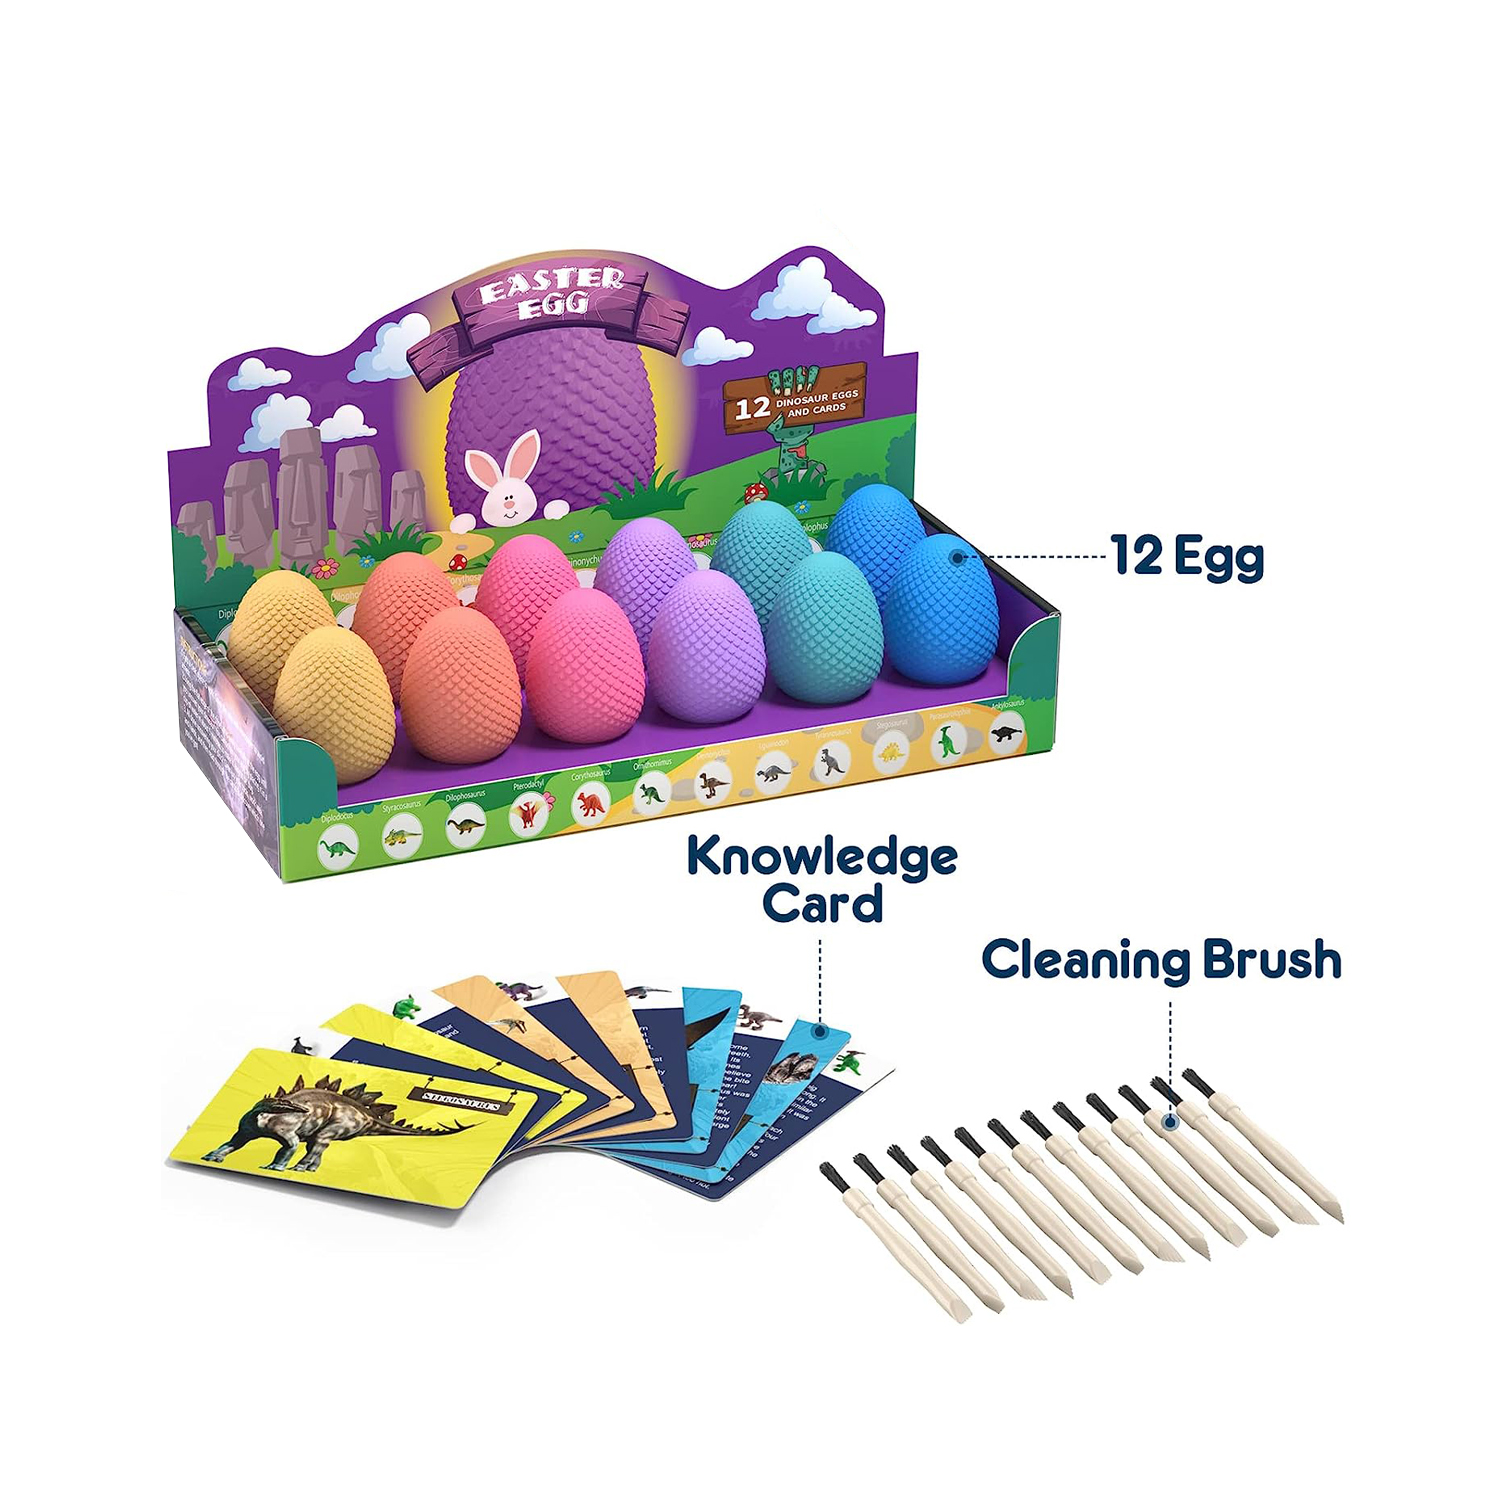 The Steam science toys for kids Colorful Dinosaur egg dig kits explore the dinosaur history